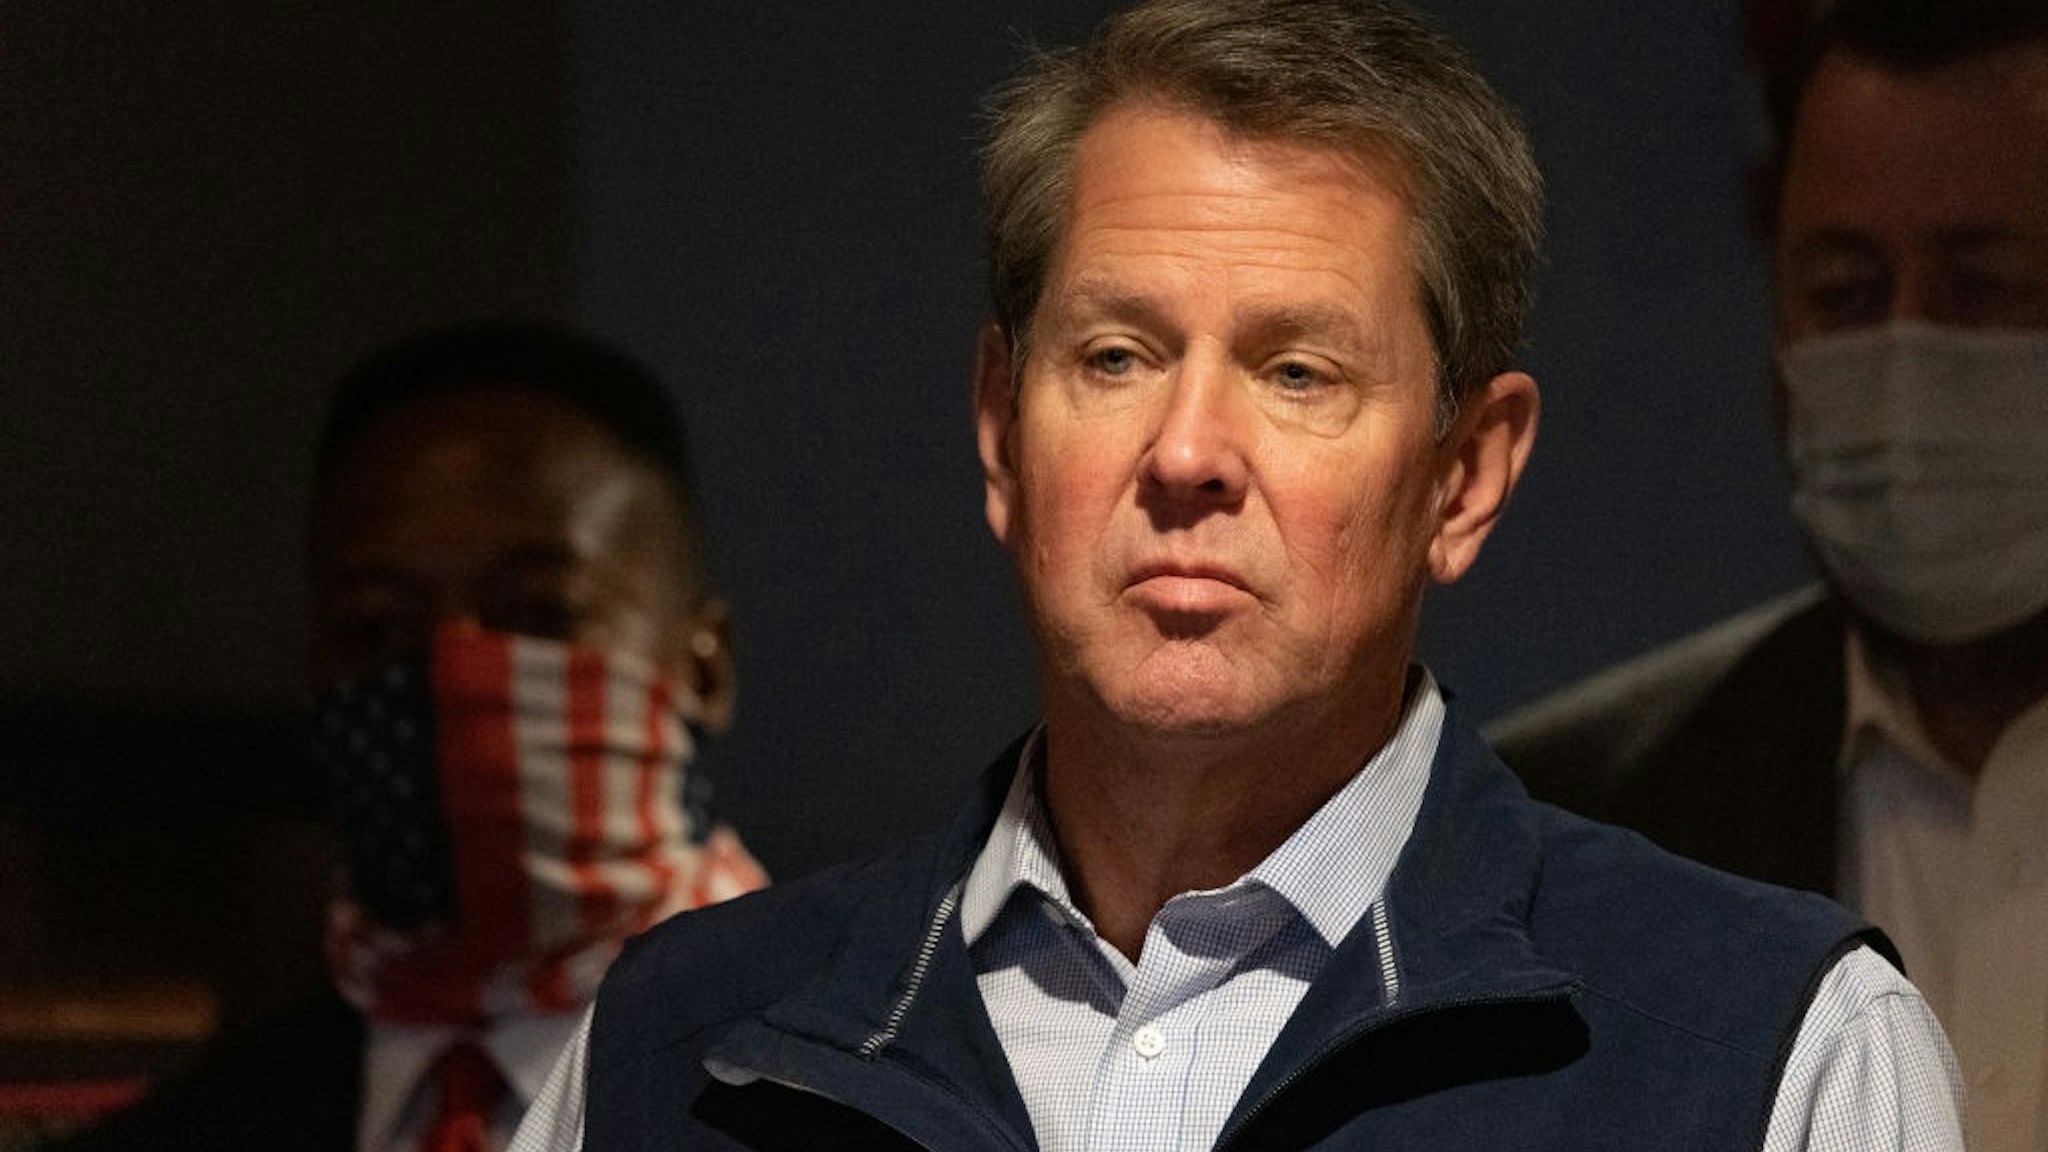 MARIETTA, GA - APRIL 10: Georgia Gov. Brian Kemp speaks at a news conference about the state's new Election Integrity Law that passed this week at AJ’s Famous Seafood and Poboys on April 10, 2021 in Marietta, Georgia.